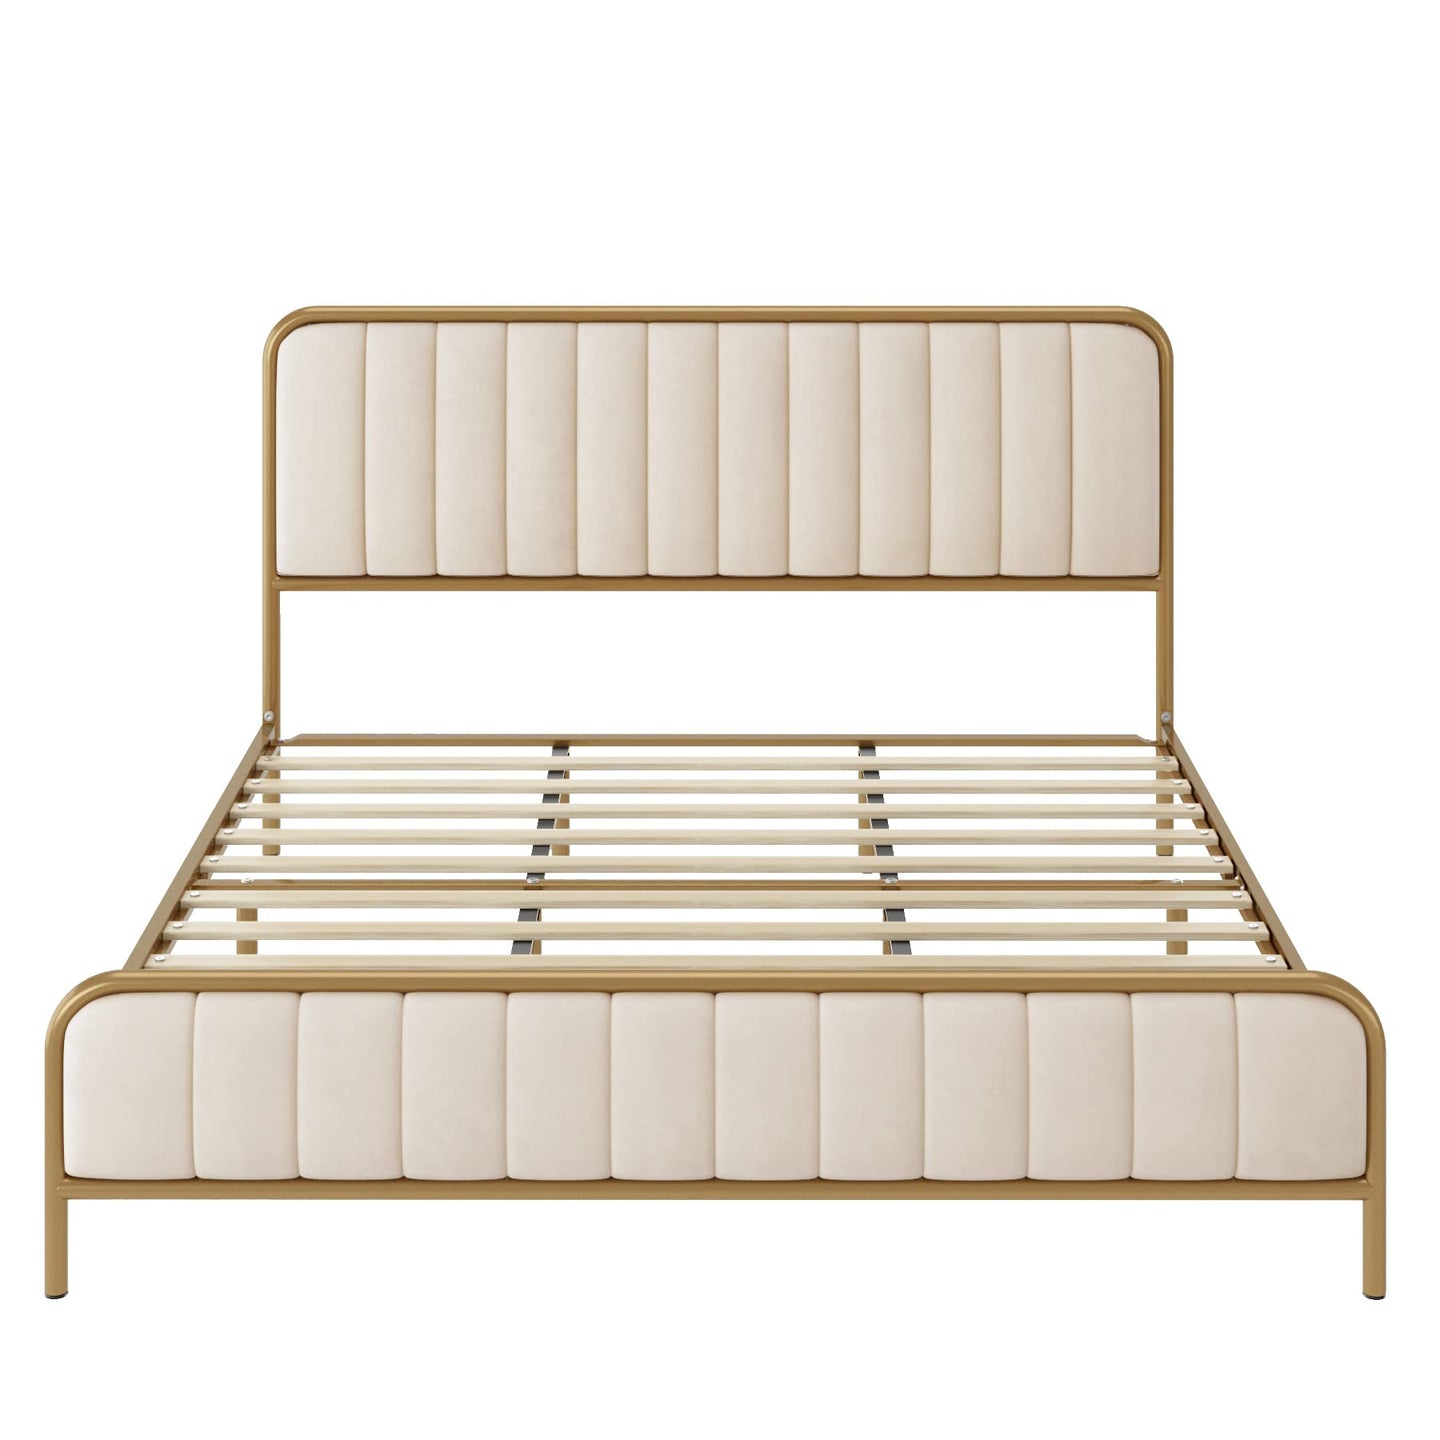 HITHOS Queen Size Bed Frame with Button Tufted Headboard, Upholstered Heavy Duty Metal Mattress Foundation with Wooden Slats, Easy Assembly, No Box Spring Needed (Golden/Off White, Queen)